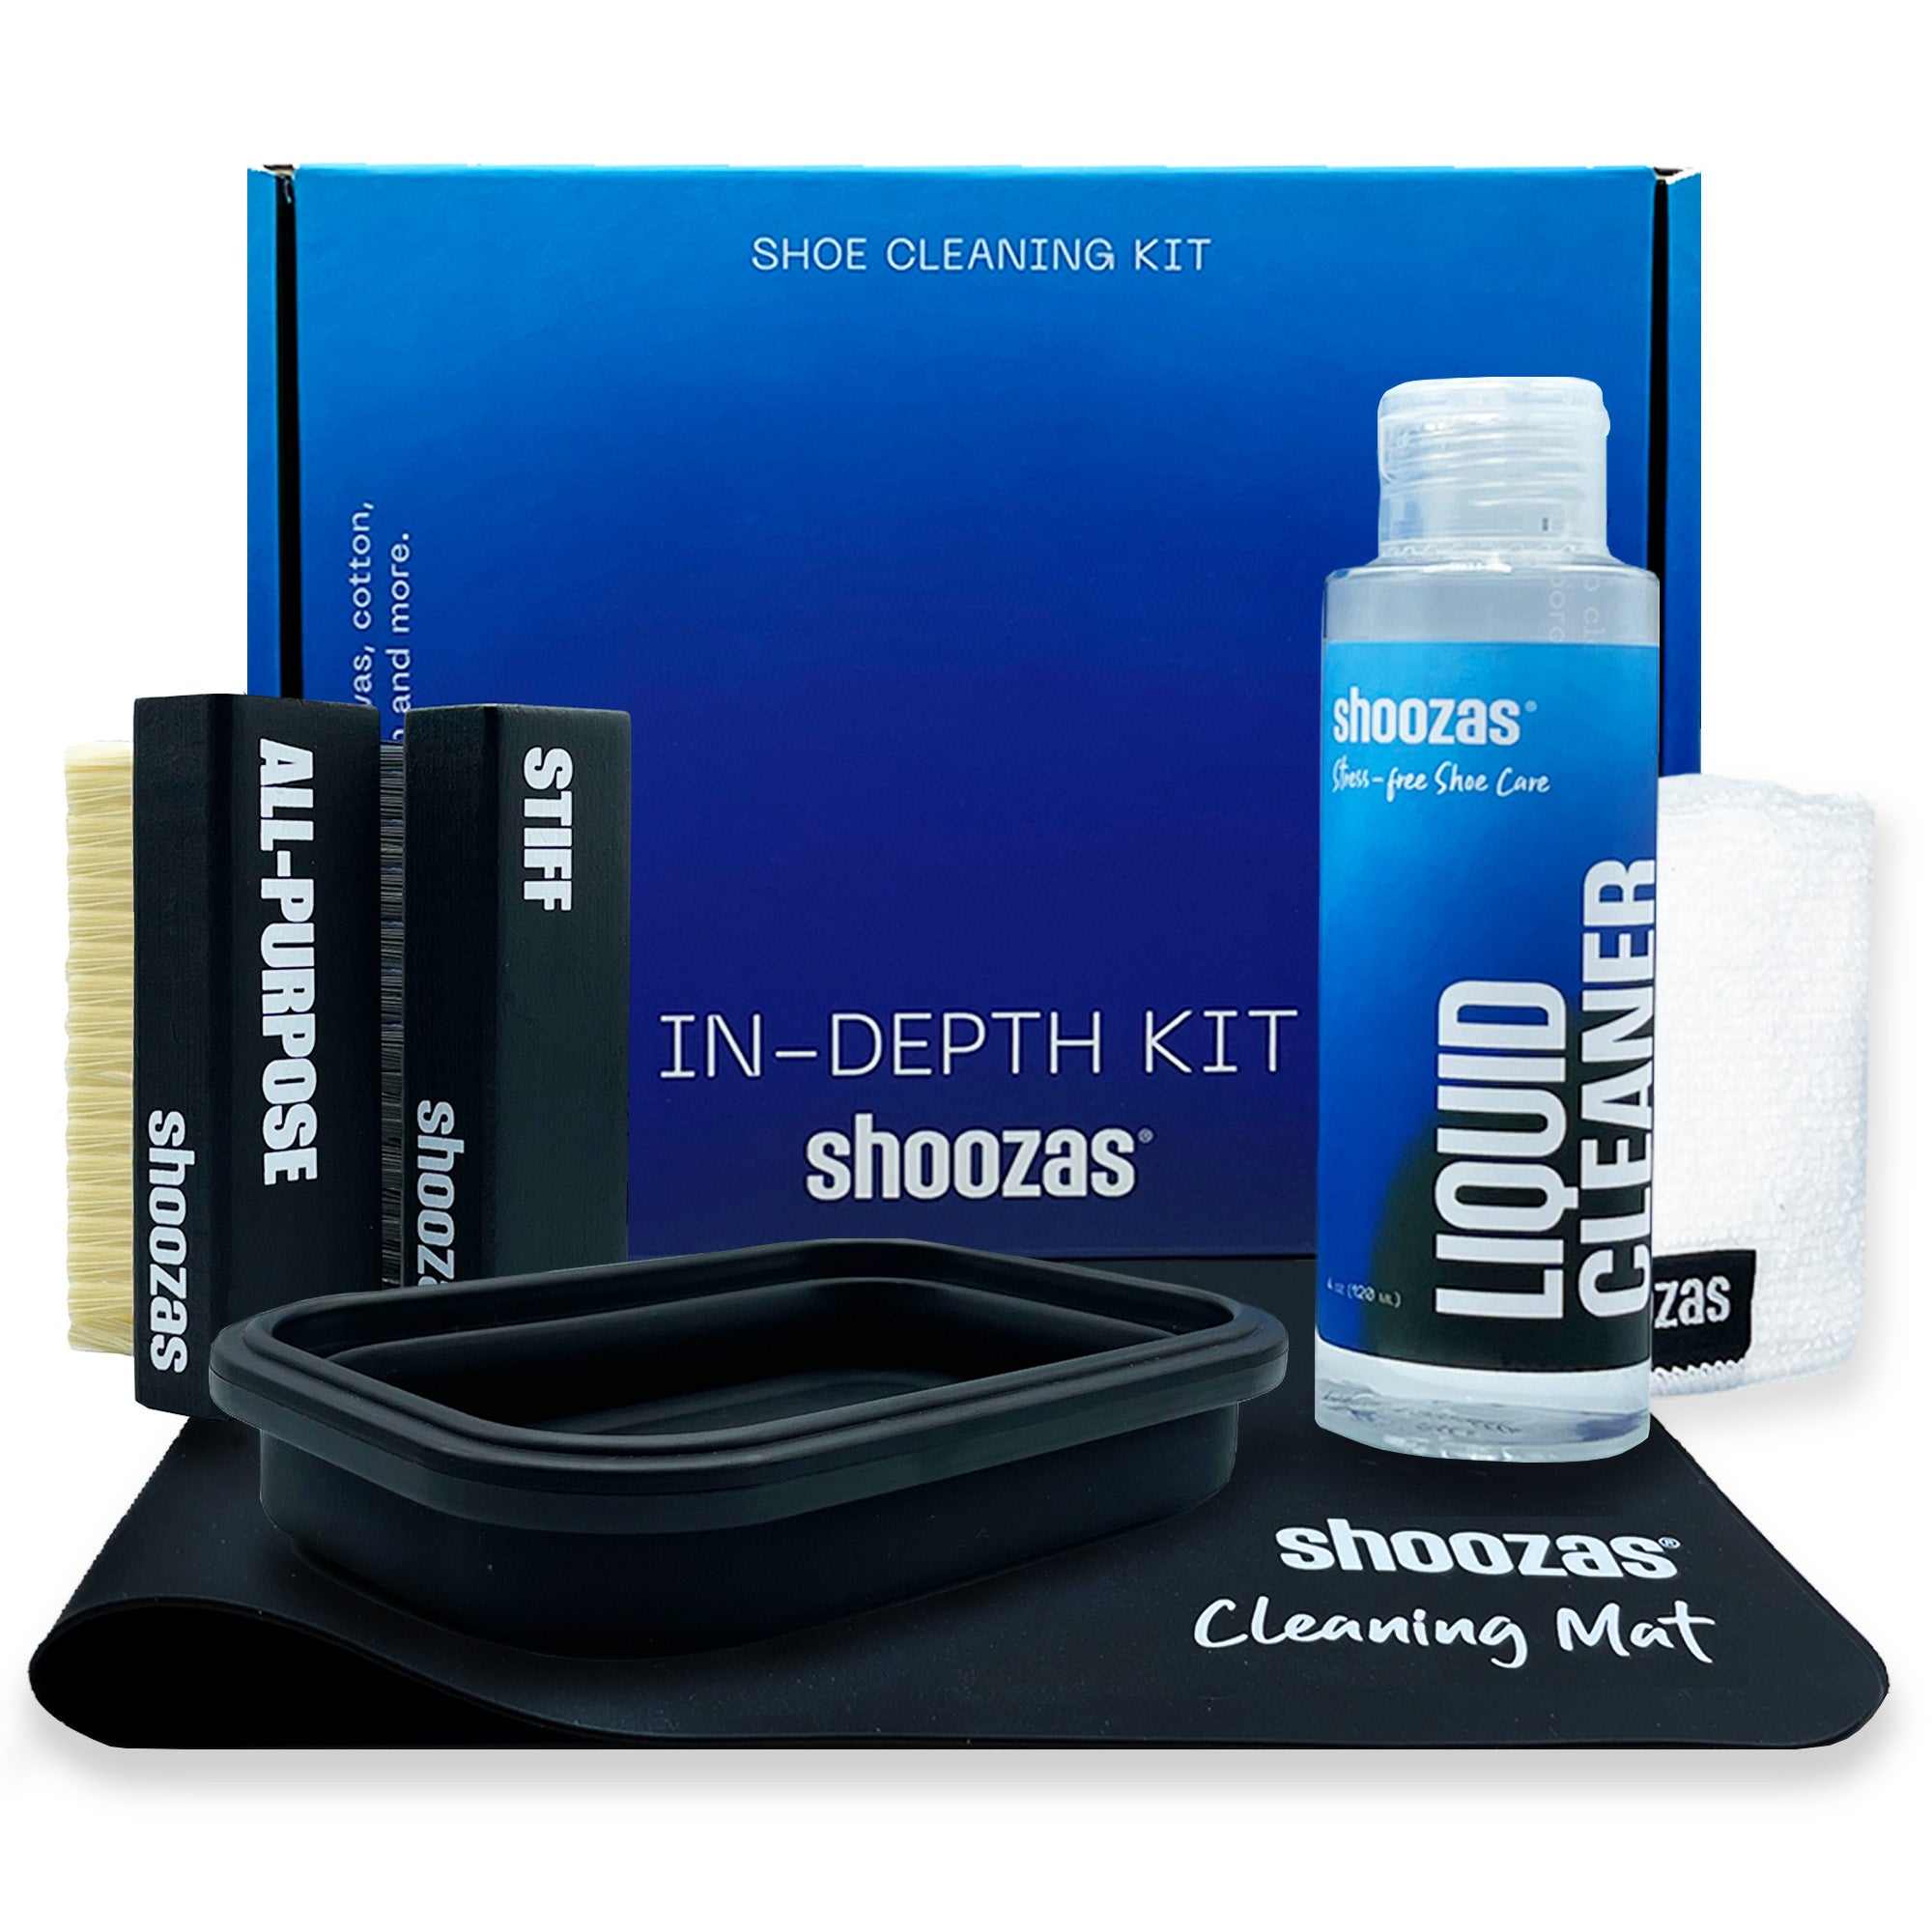 In-Depth Shoe Cleaning Kit